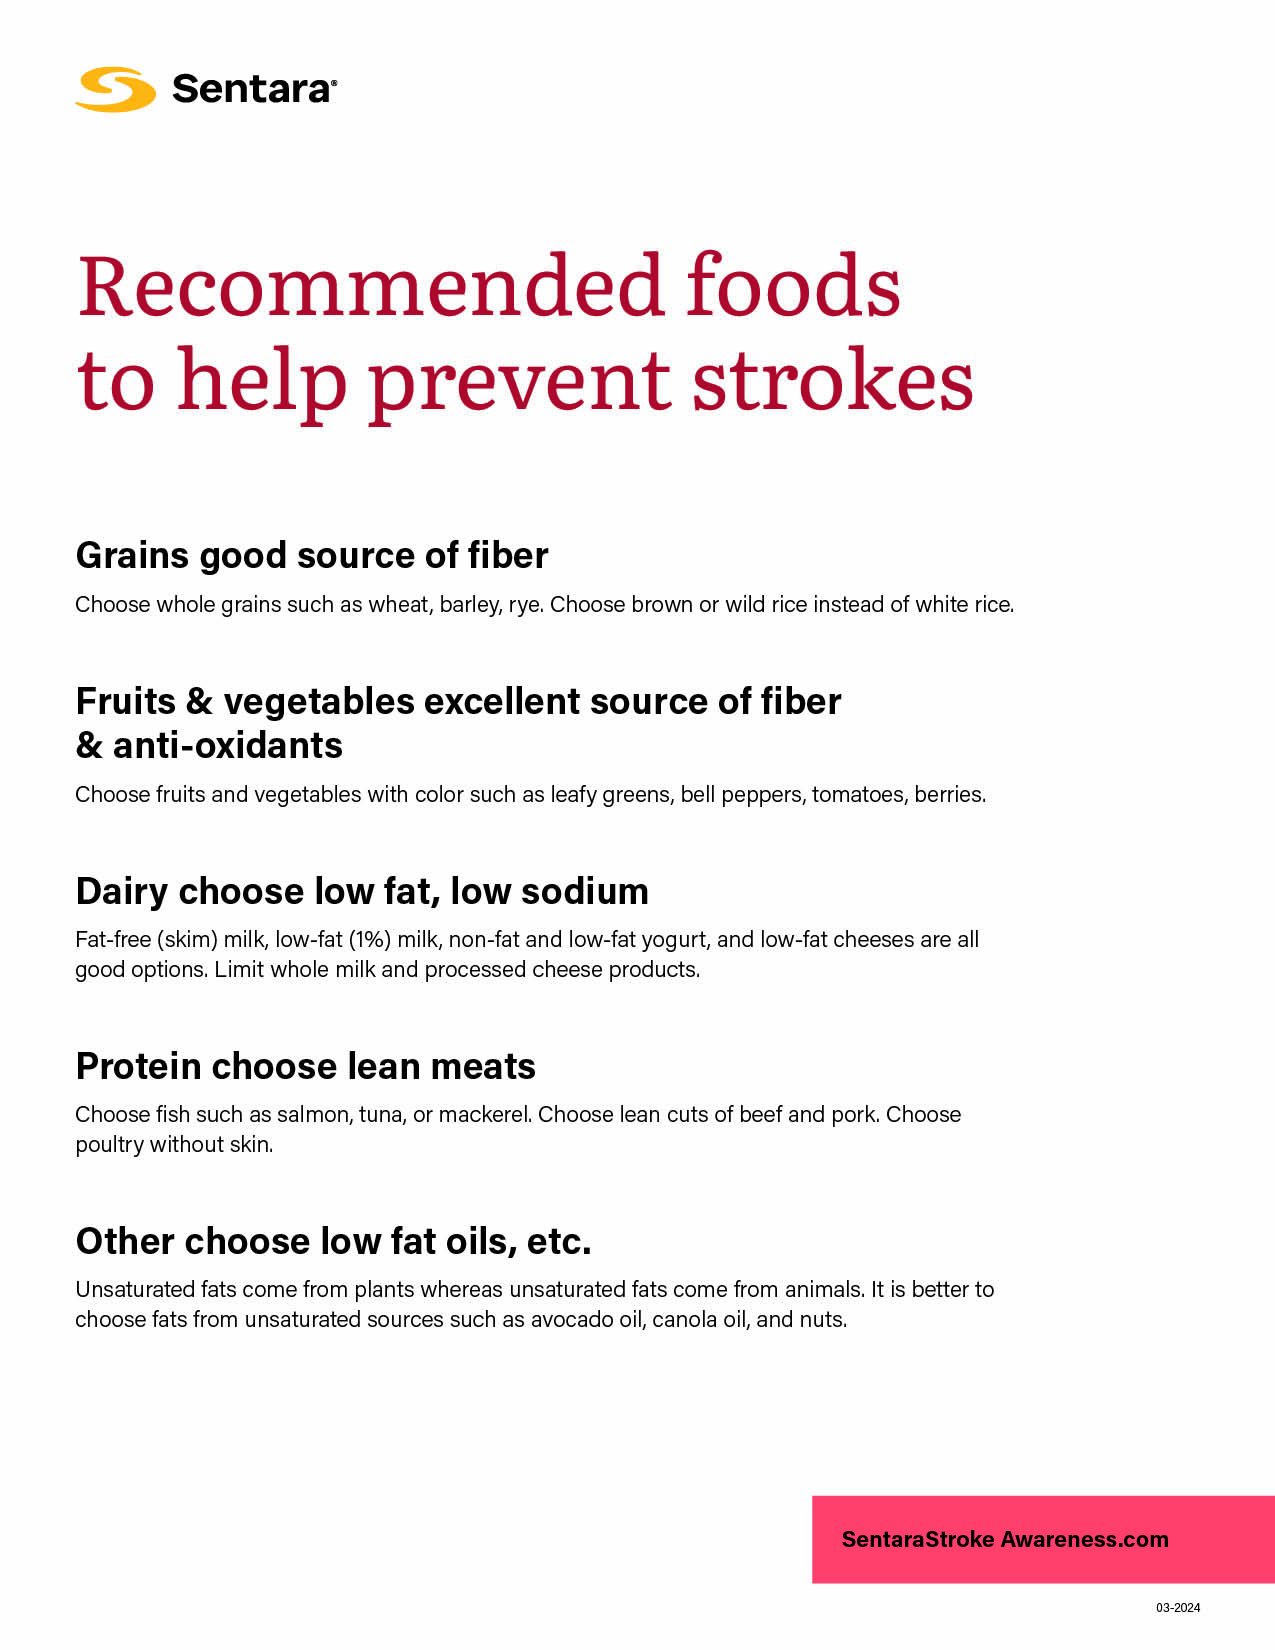 Recommended foods to help prevent stroke